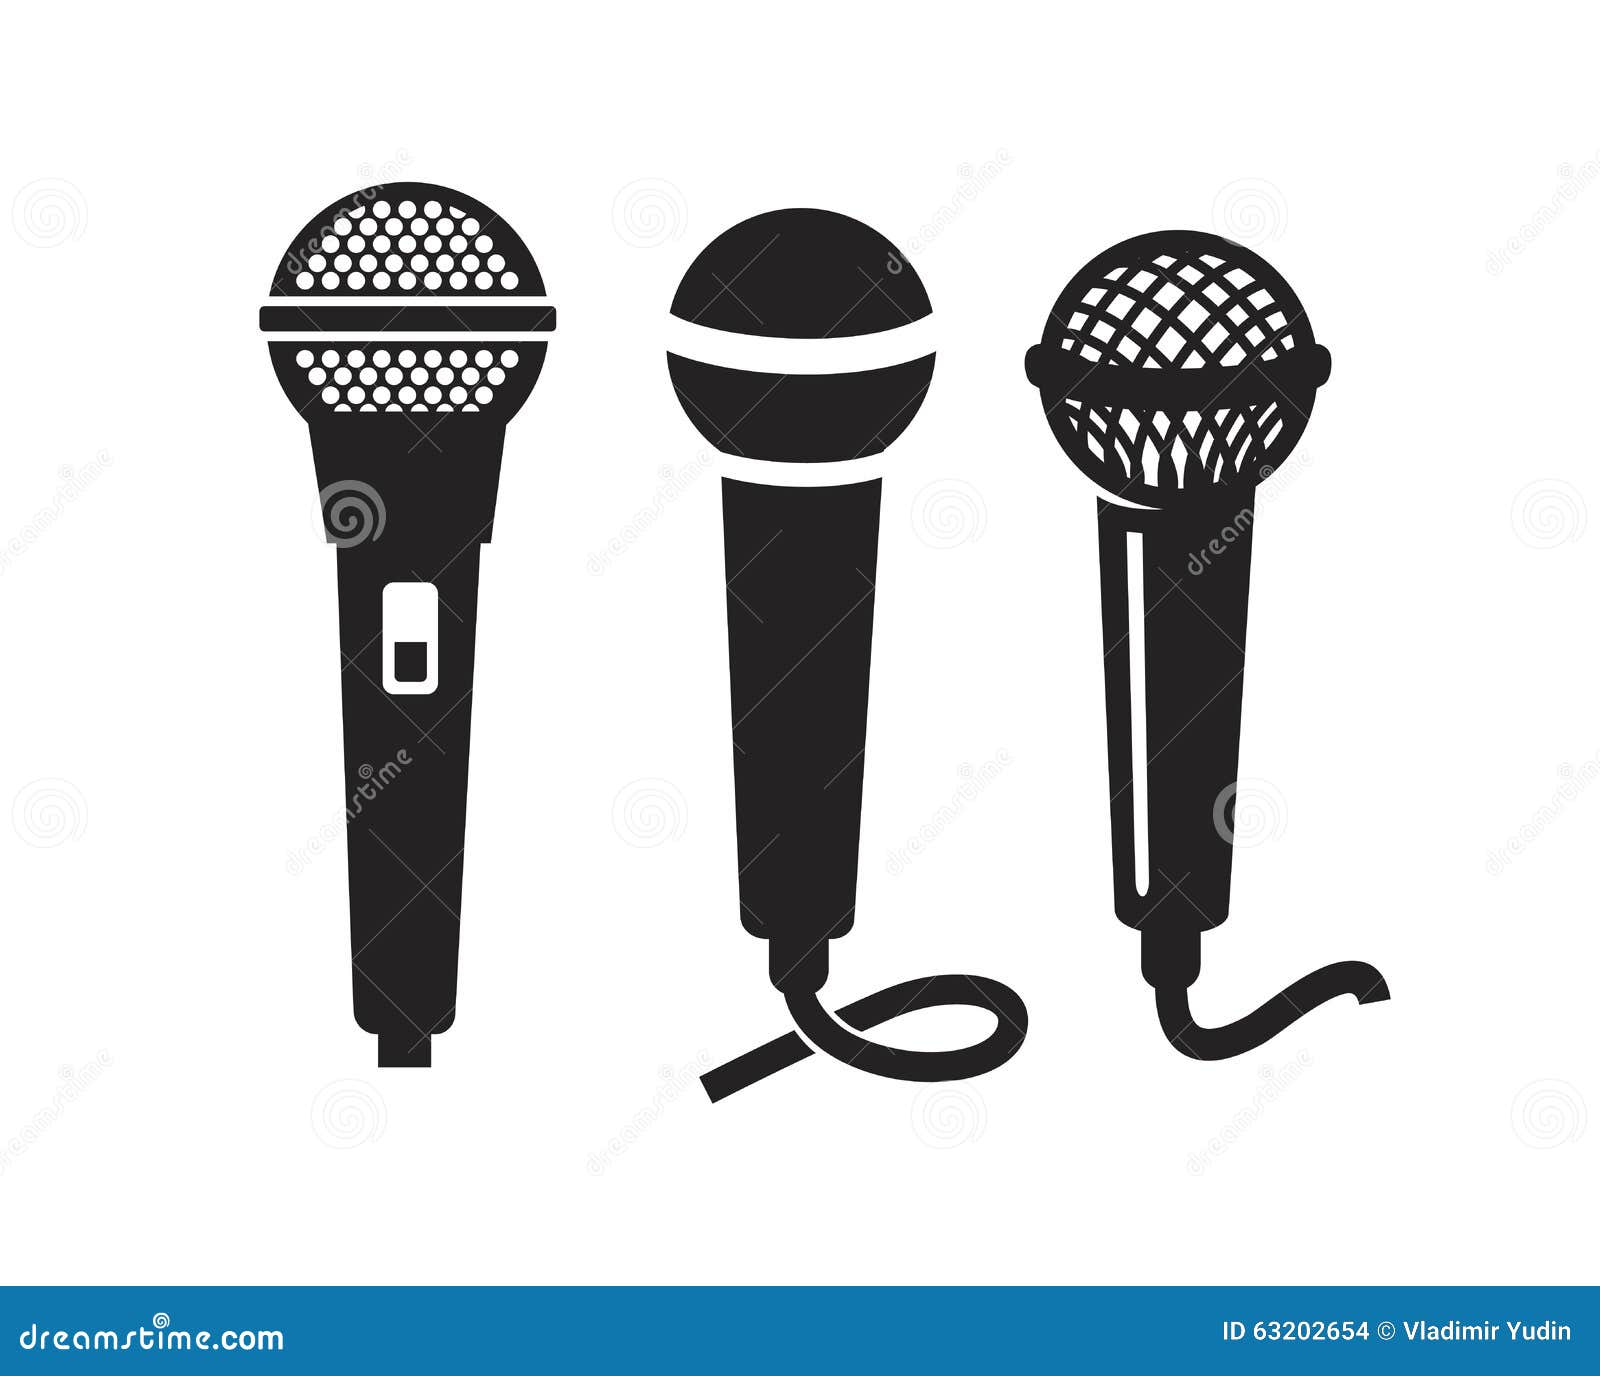  microphone icon